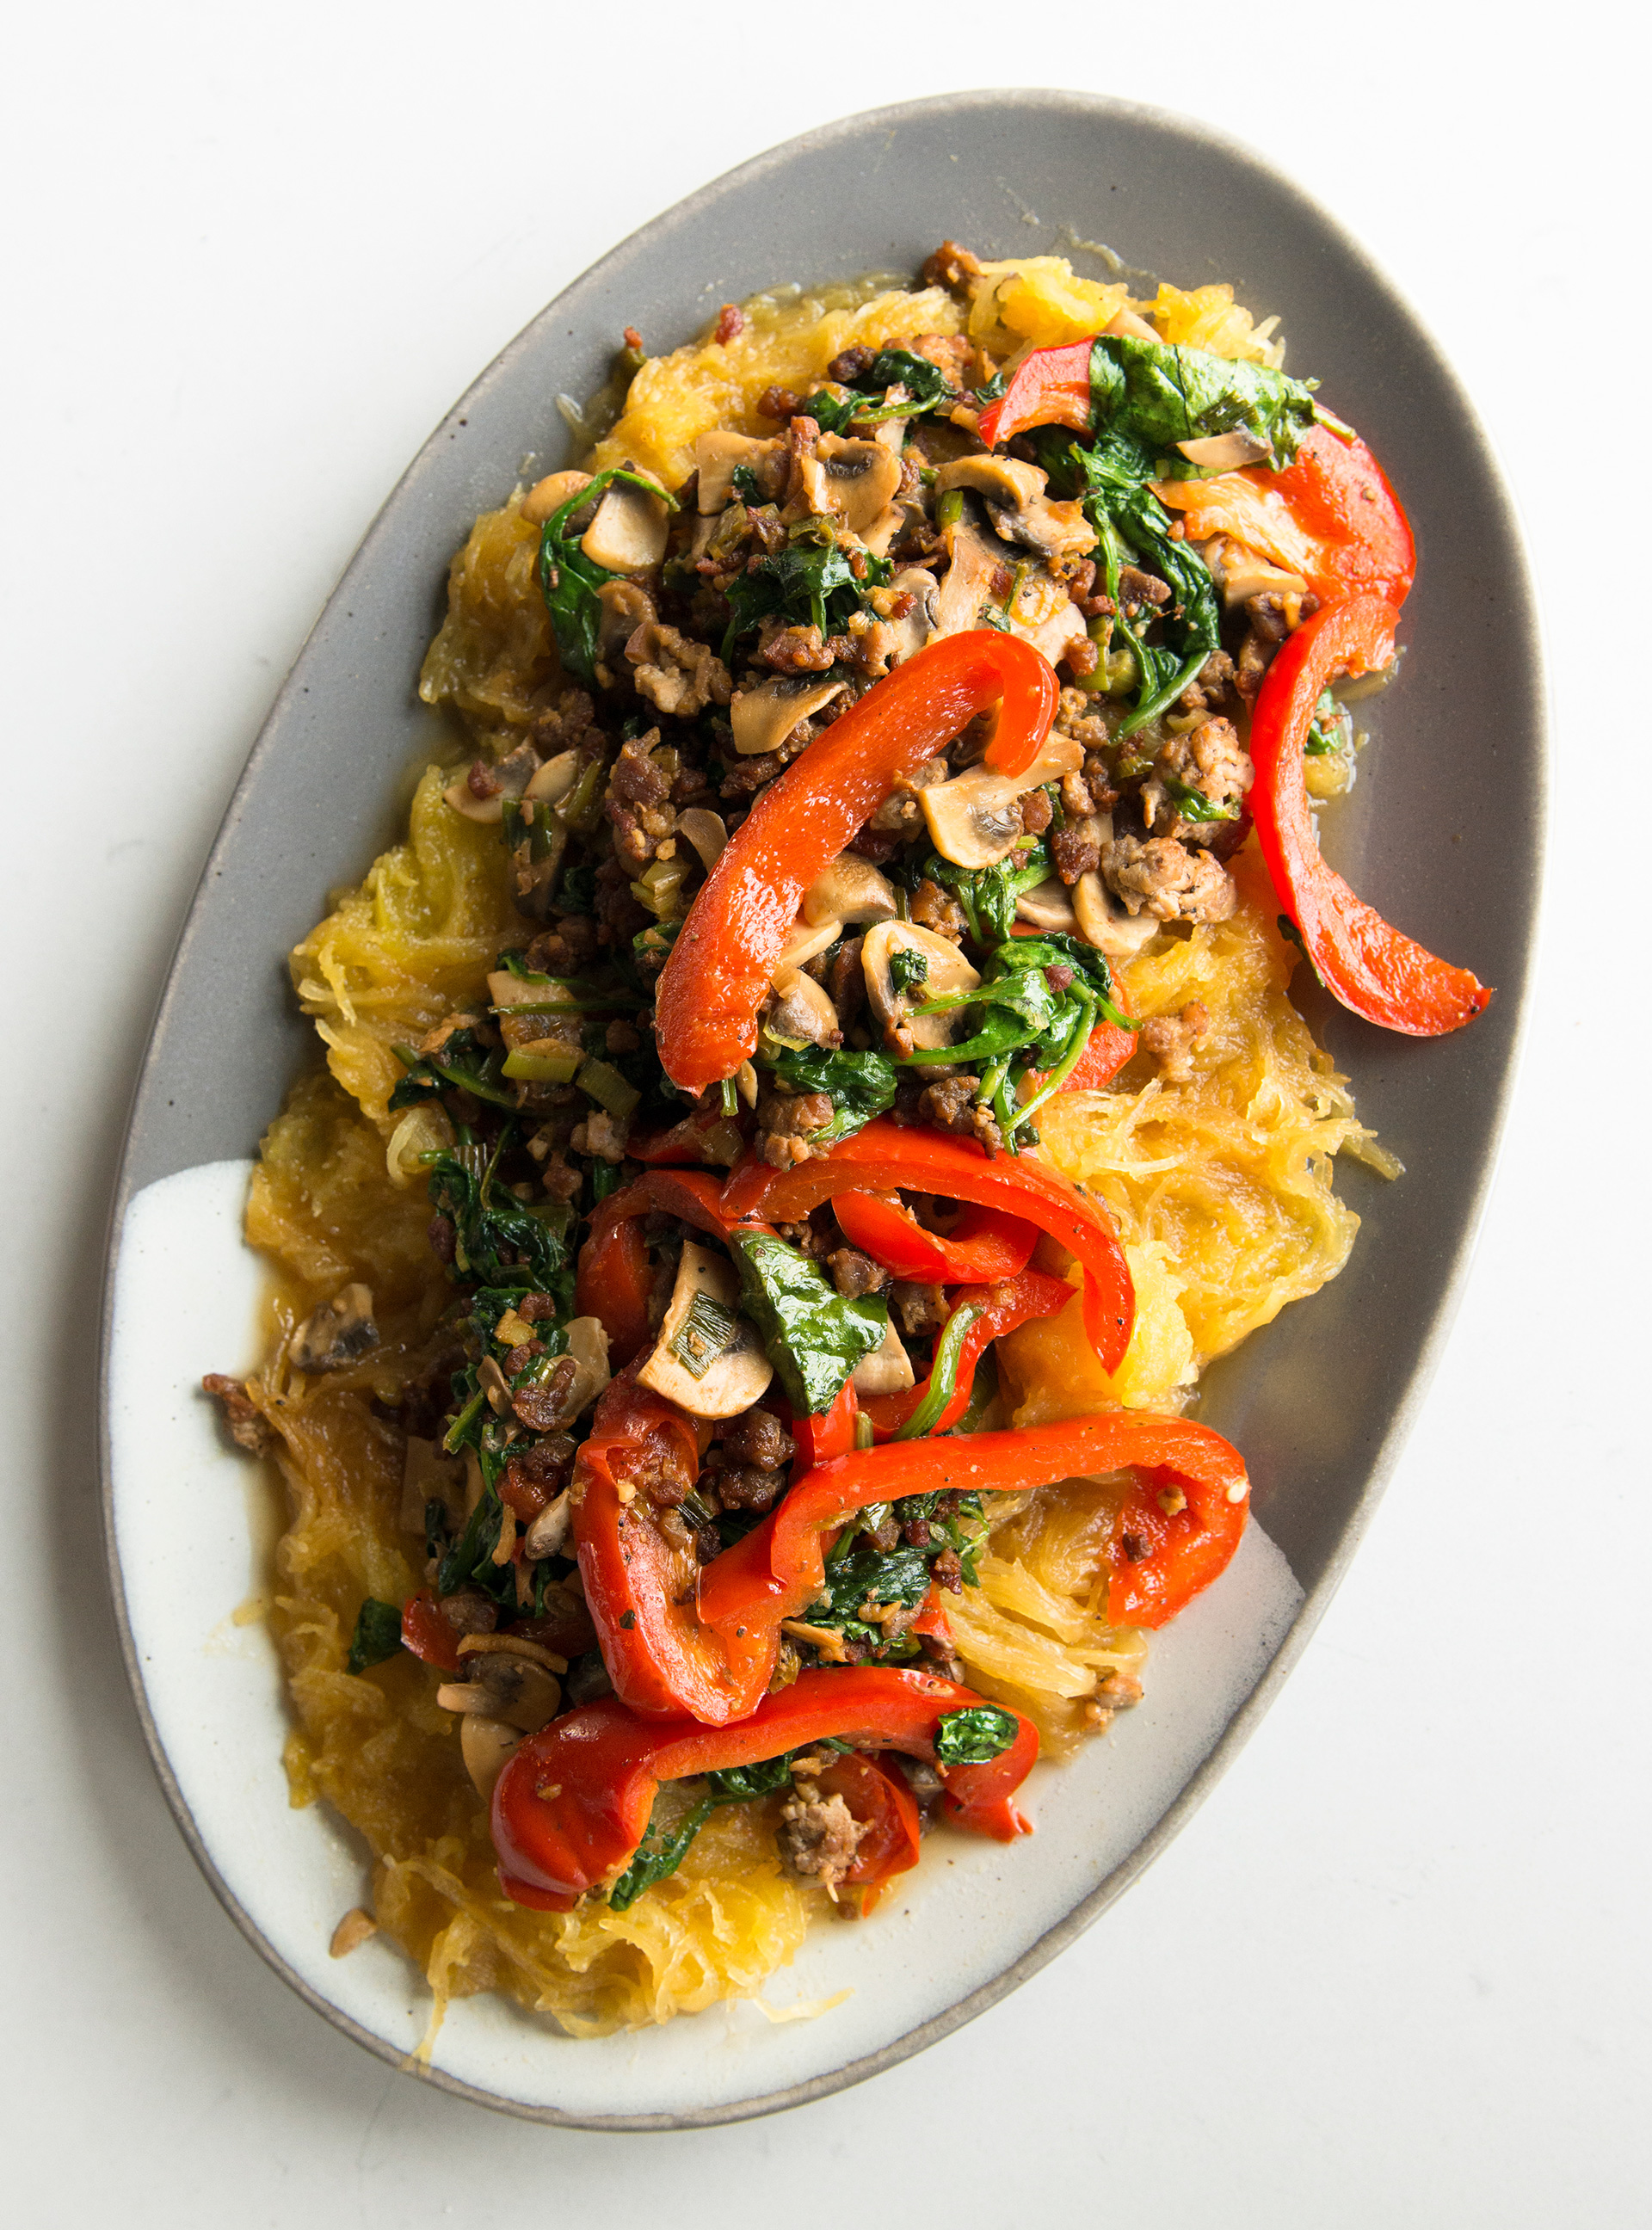 Spaghetti Squash with Veal and Spinach